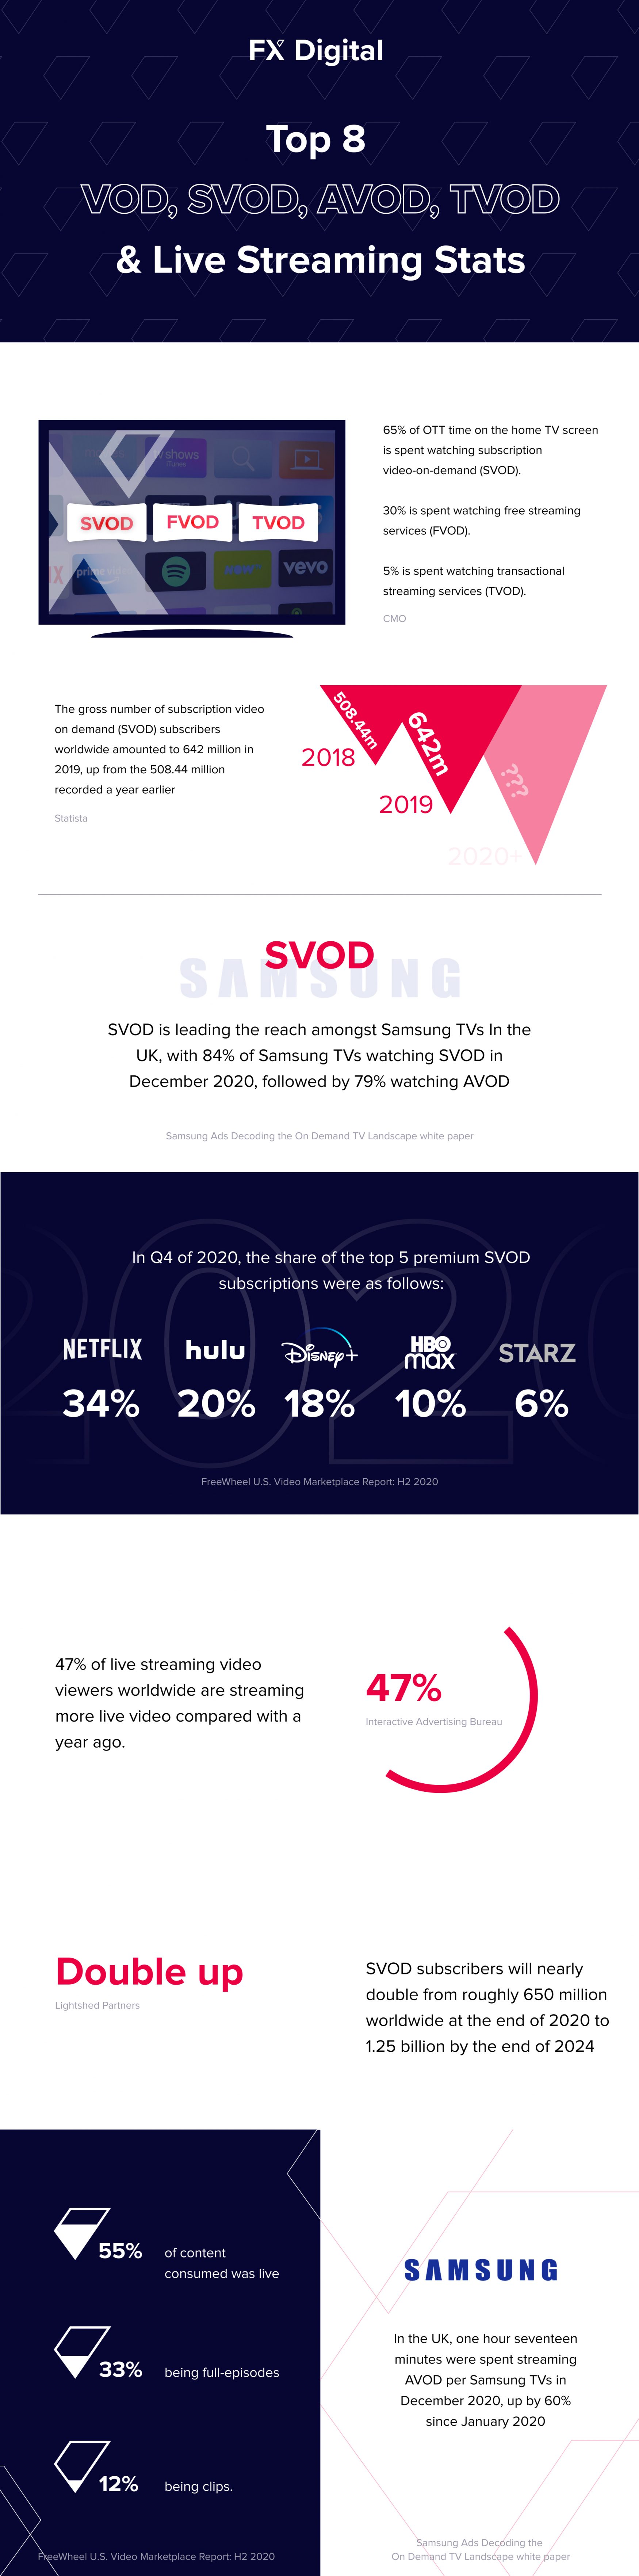 Top 8 VOD, SVOD, AVOD, TVOD & Live Streaming Stats